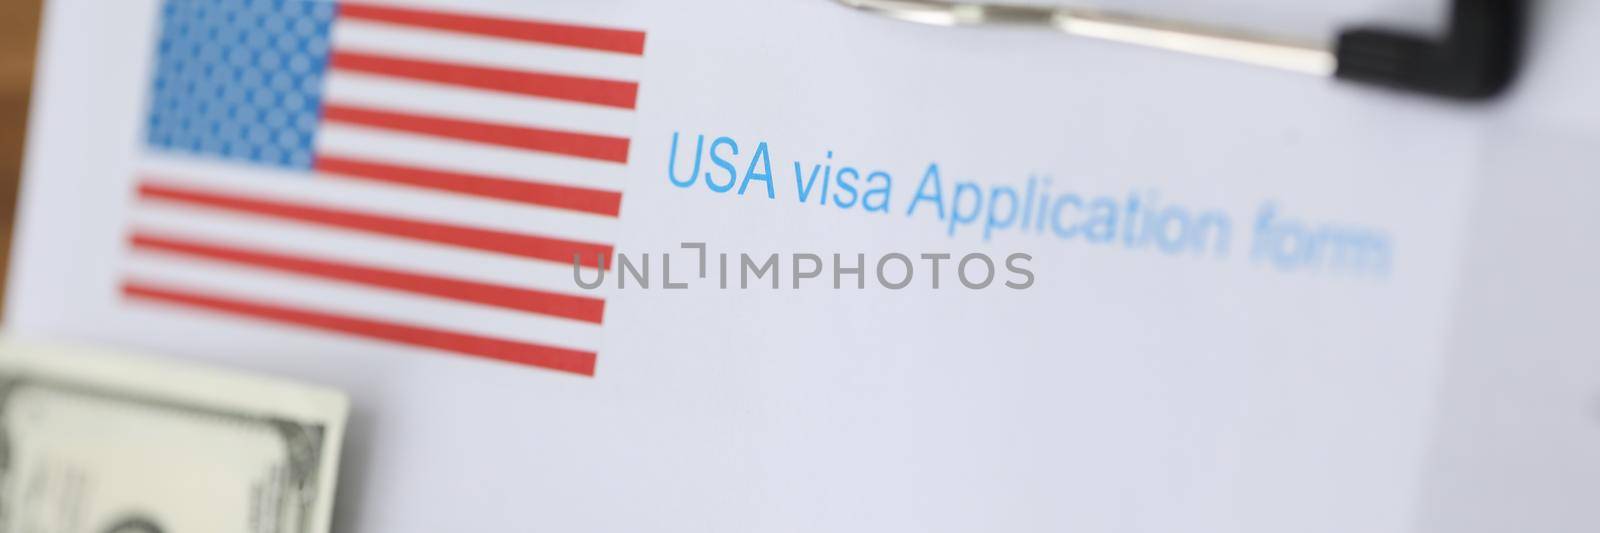 Documents for american visa and passport with money lying on table closeup. Assistance in paperwork for traveling abroad concept